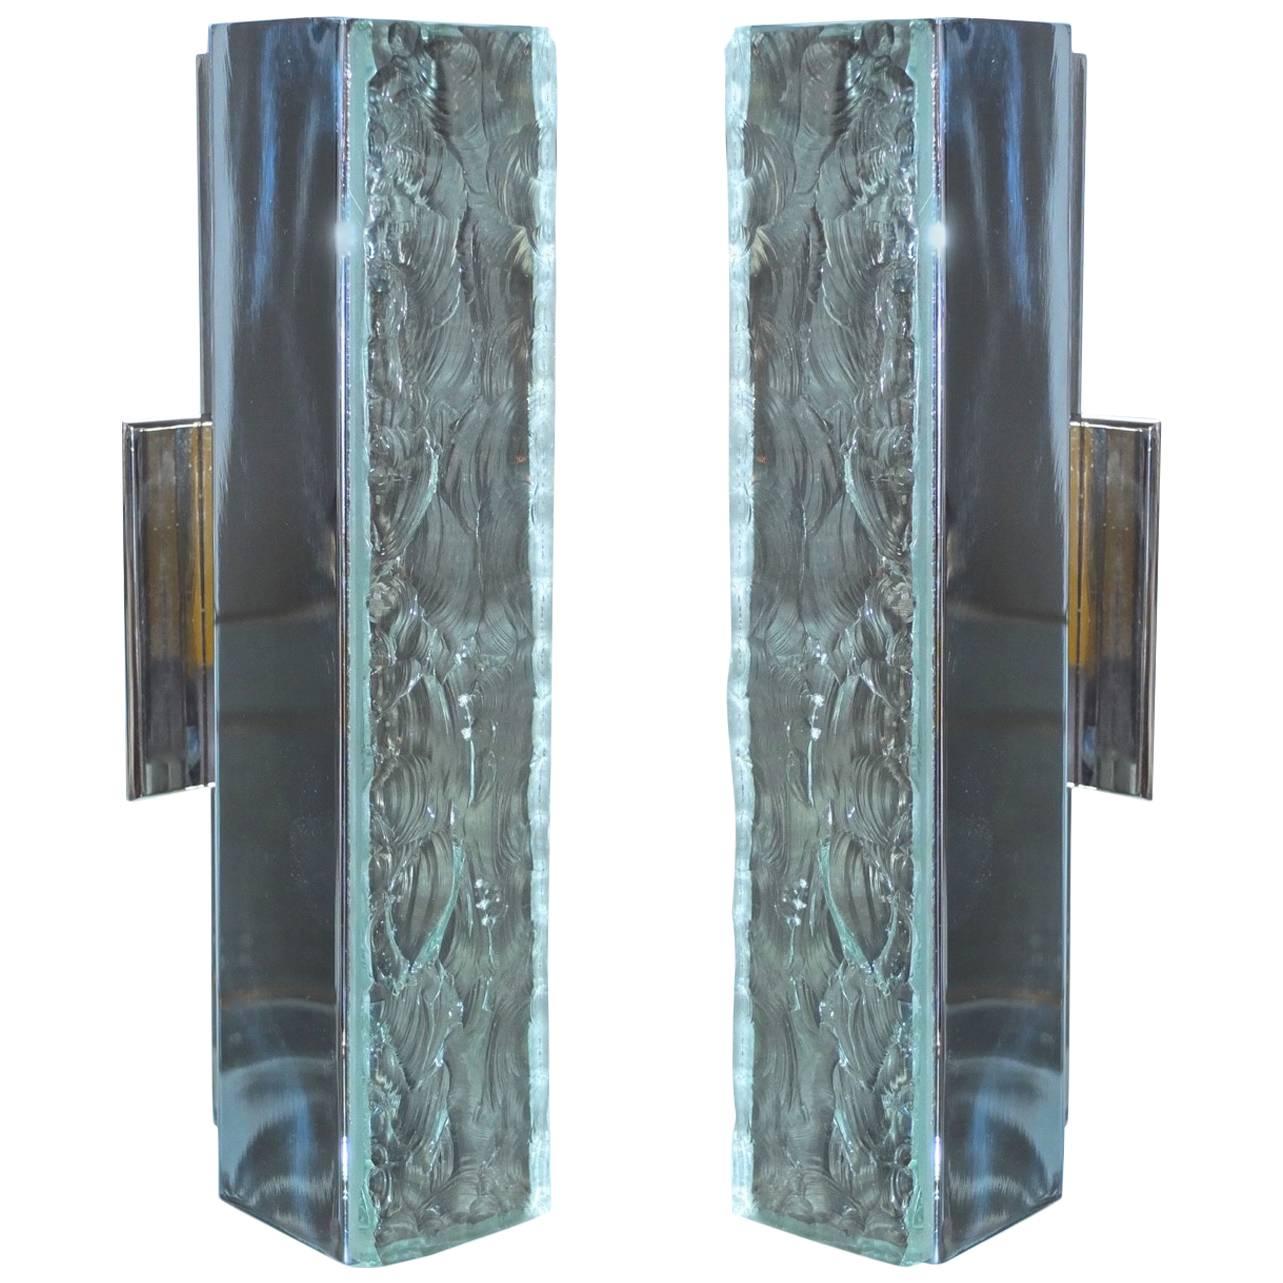 Pair of Max Ingrand for Fontana Arte Chiseled Glass & Nickel Wall Sconces